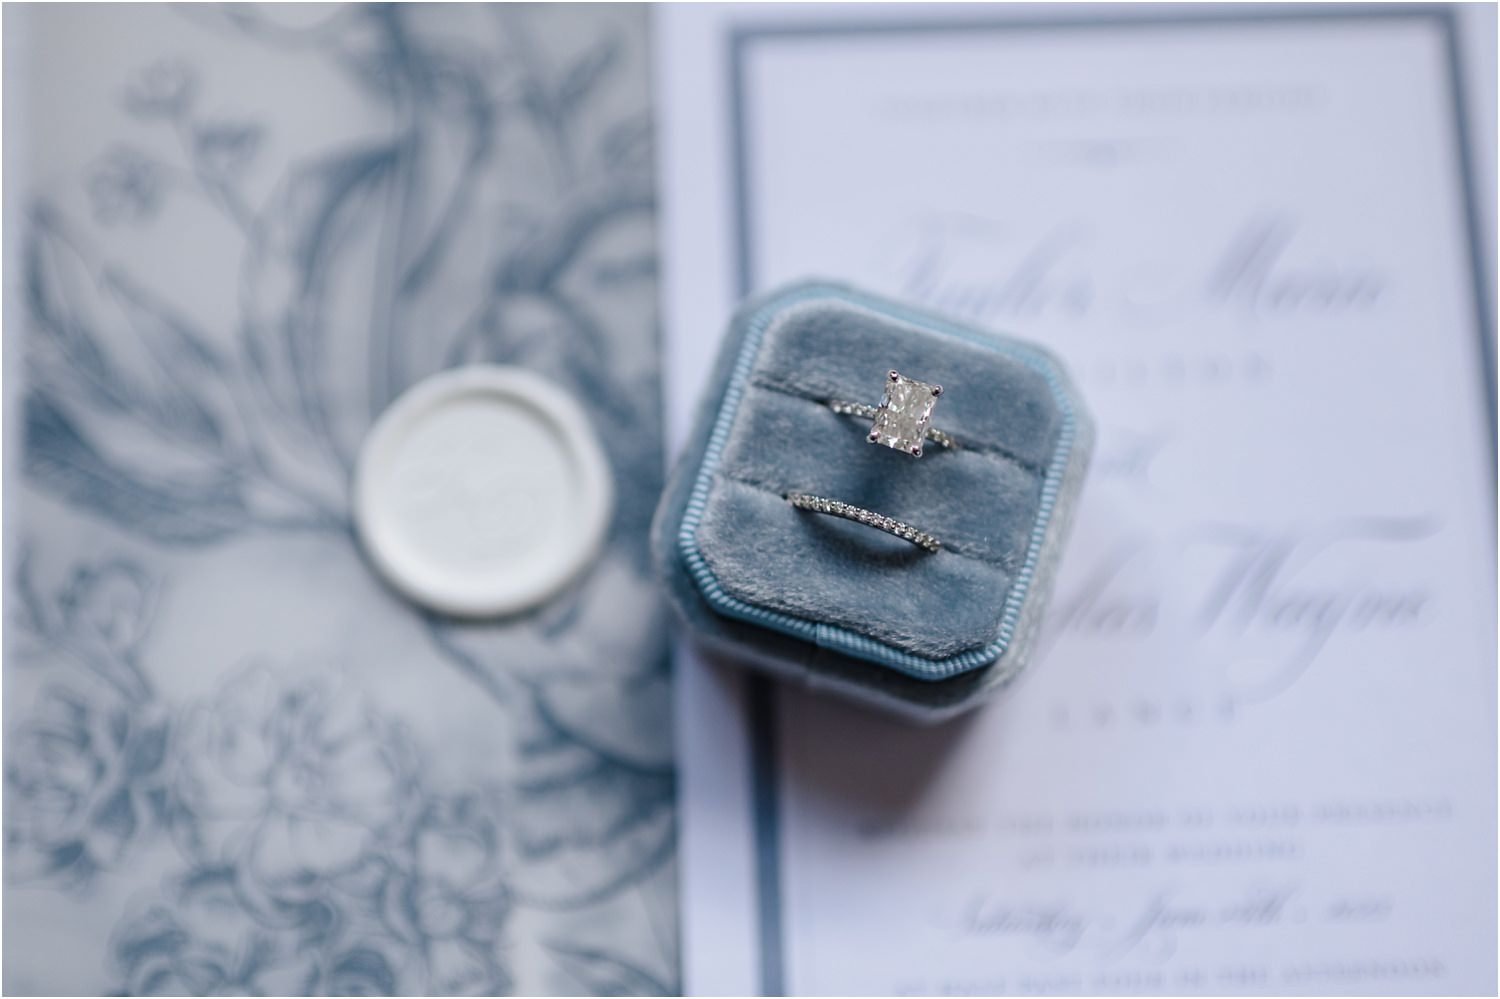  A close-up of wedding rings in a blue velvet box.  